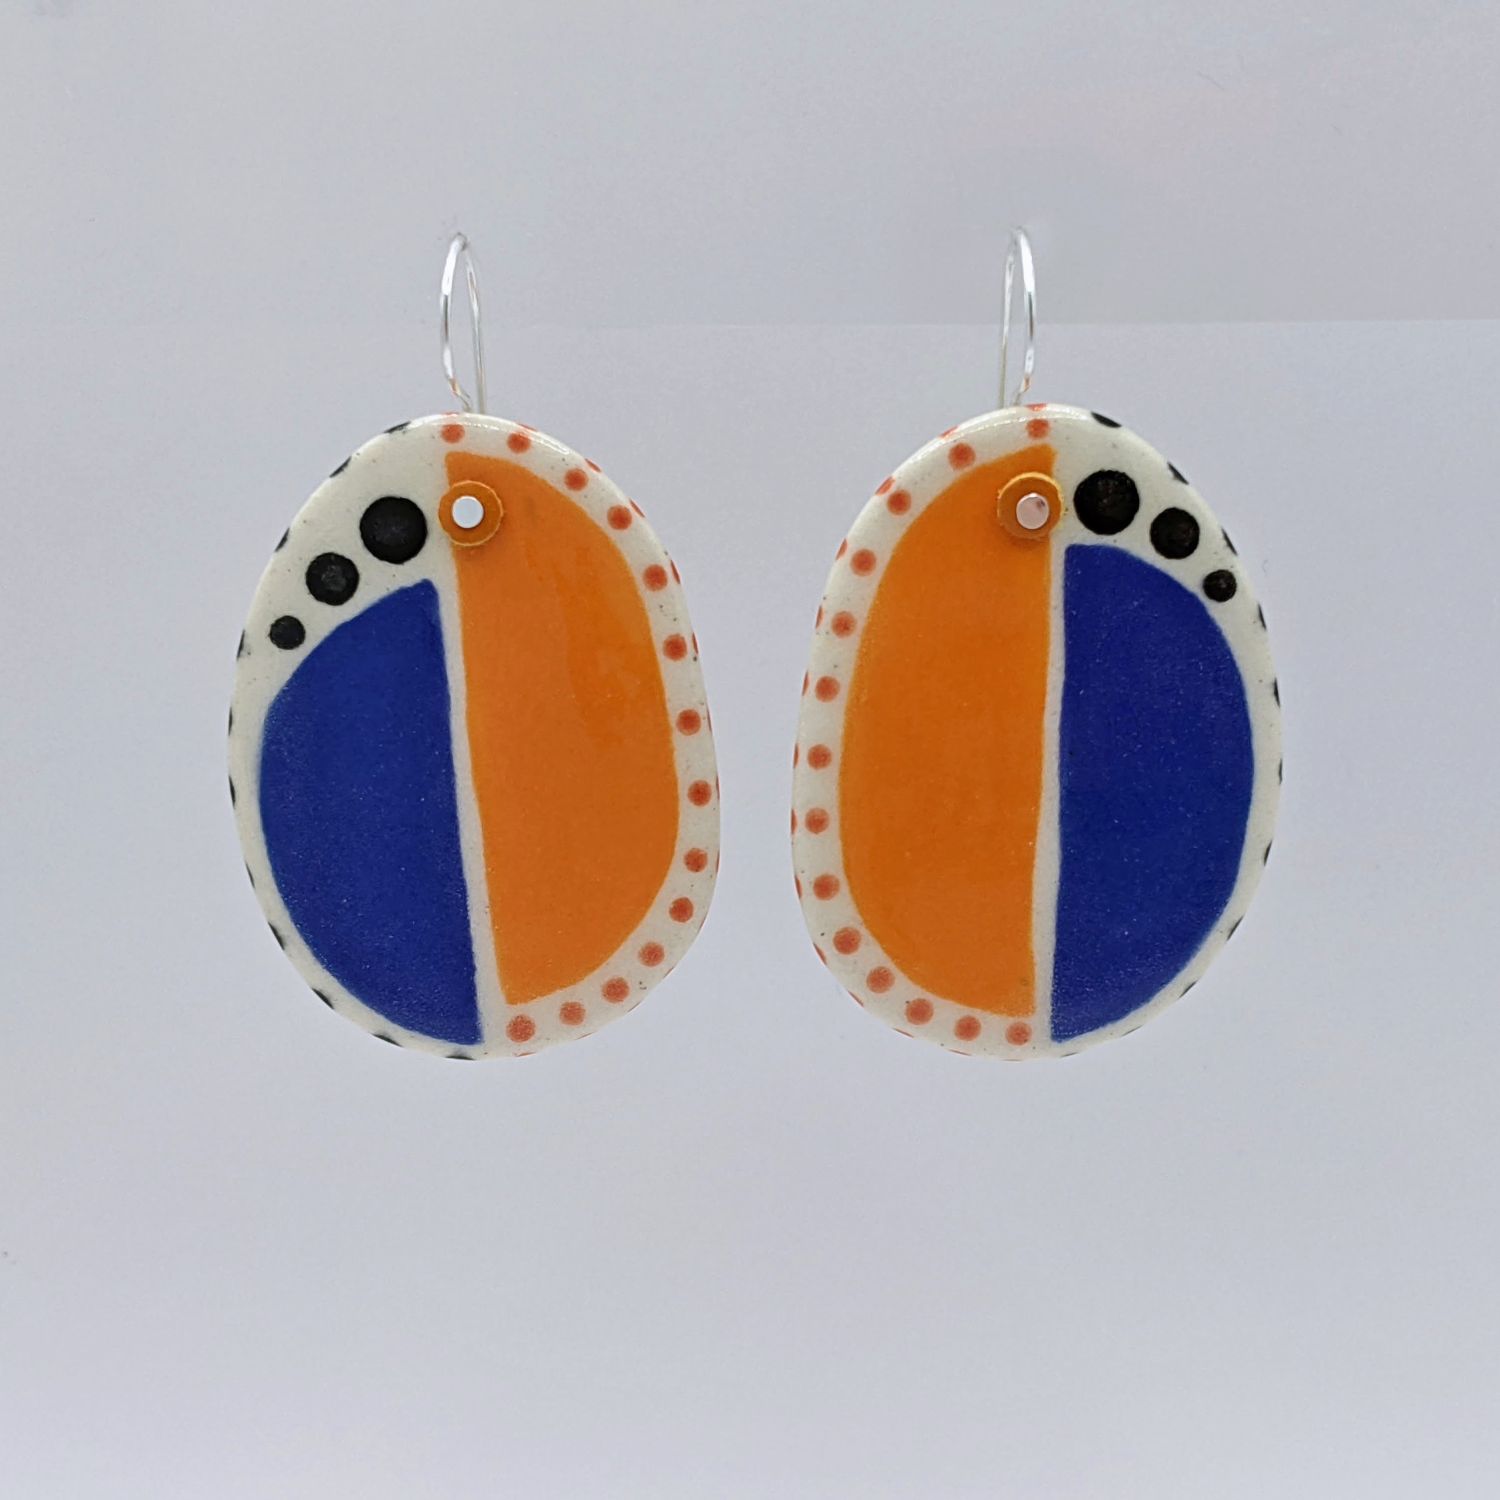 Here and Here: Half Blue and Half Orange Ceramic Disc Earrings Product Image 2 of 4